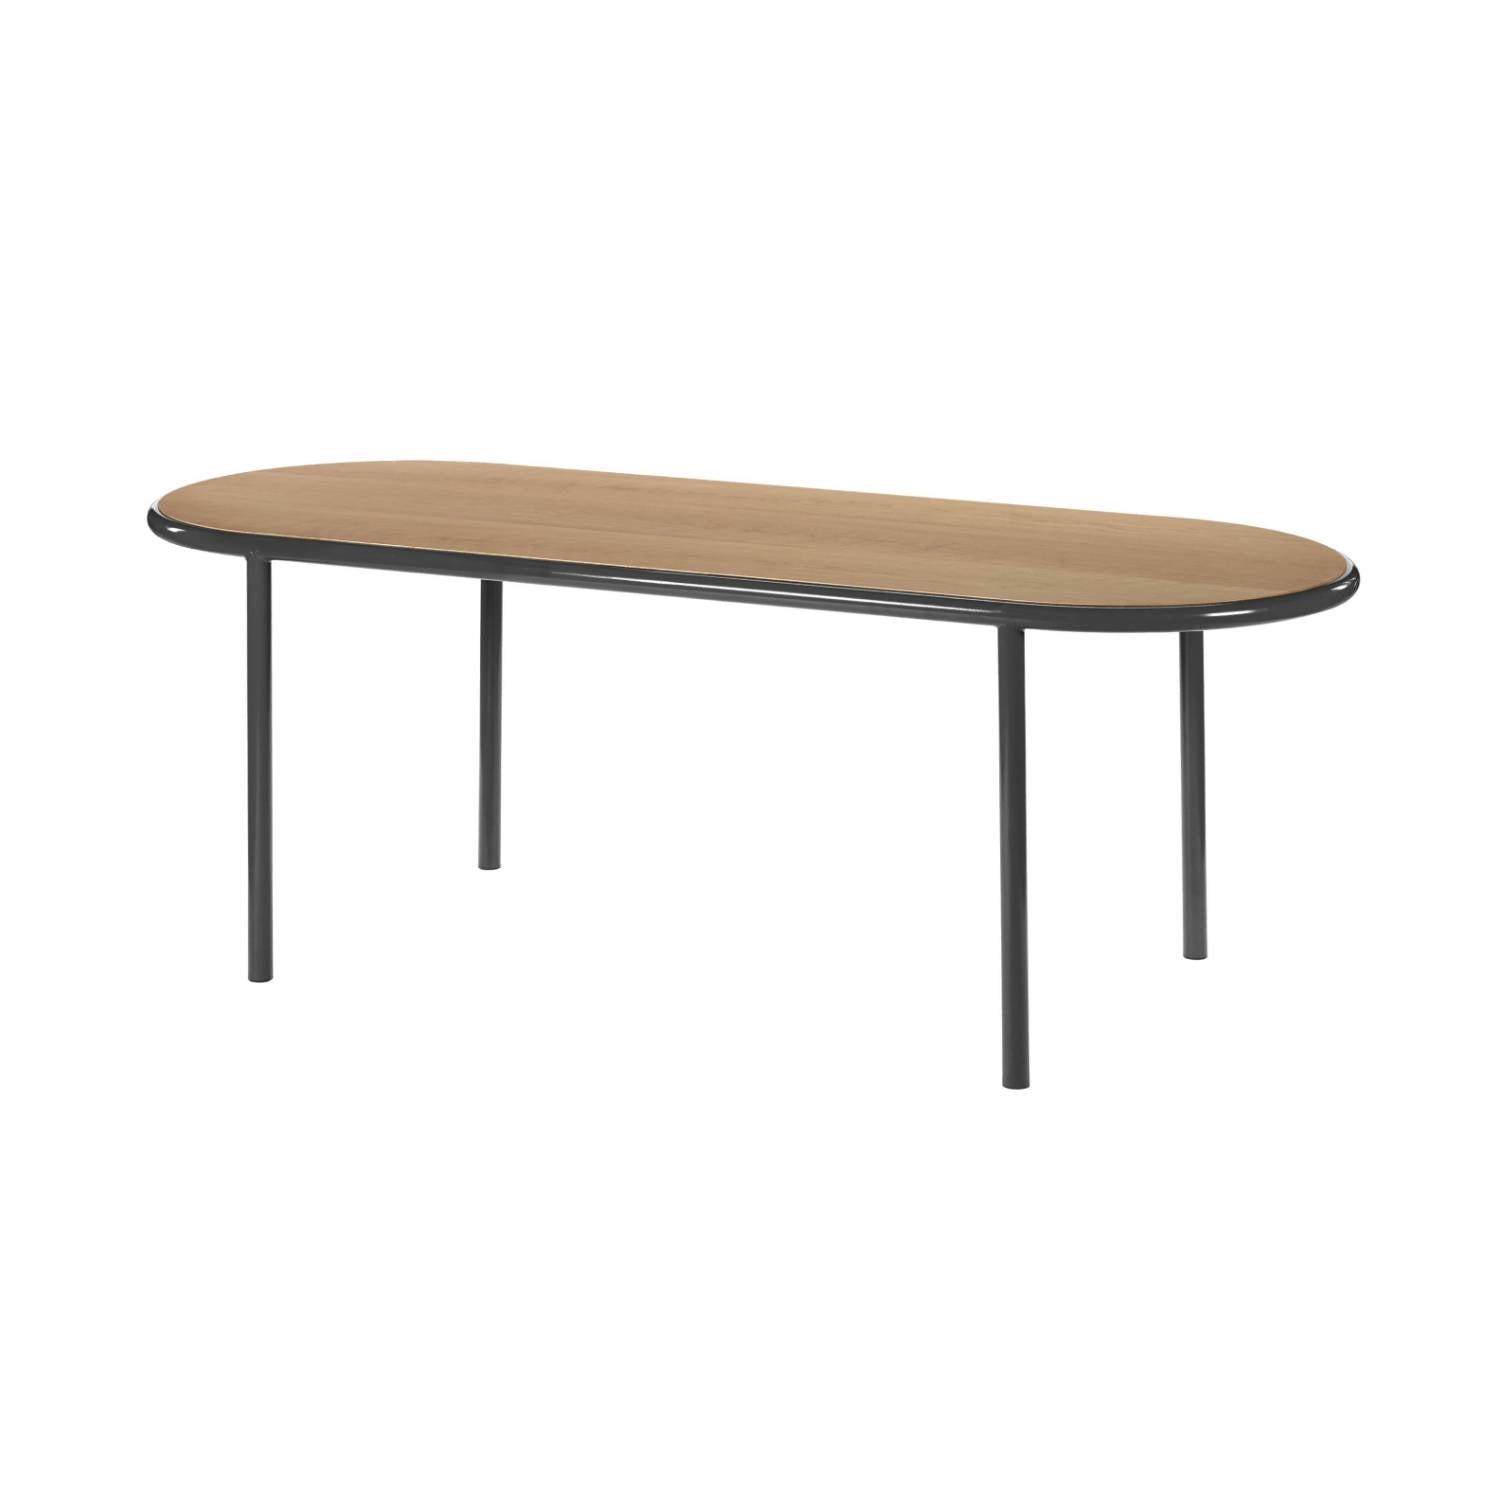 Wooden Table: Oval + Cherry + Black